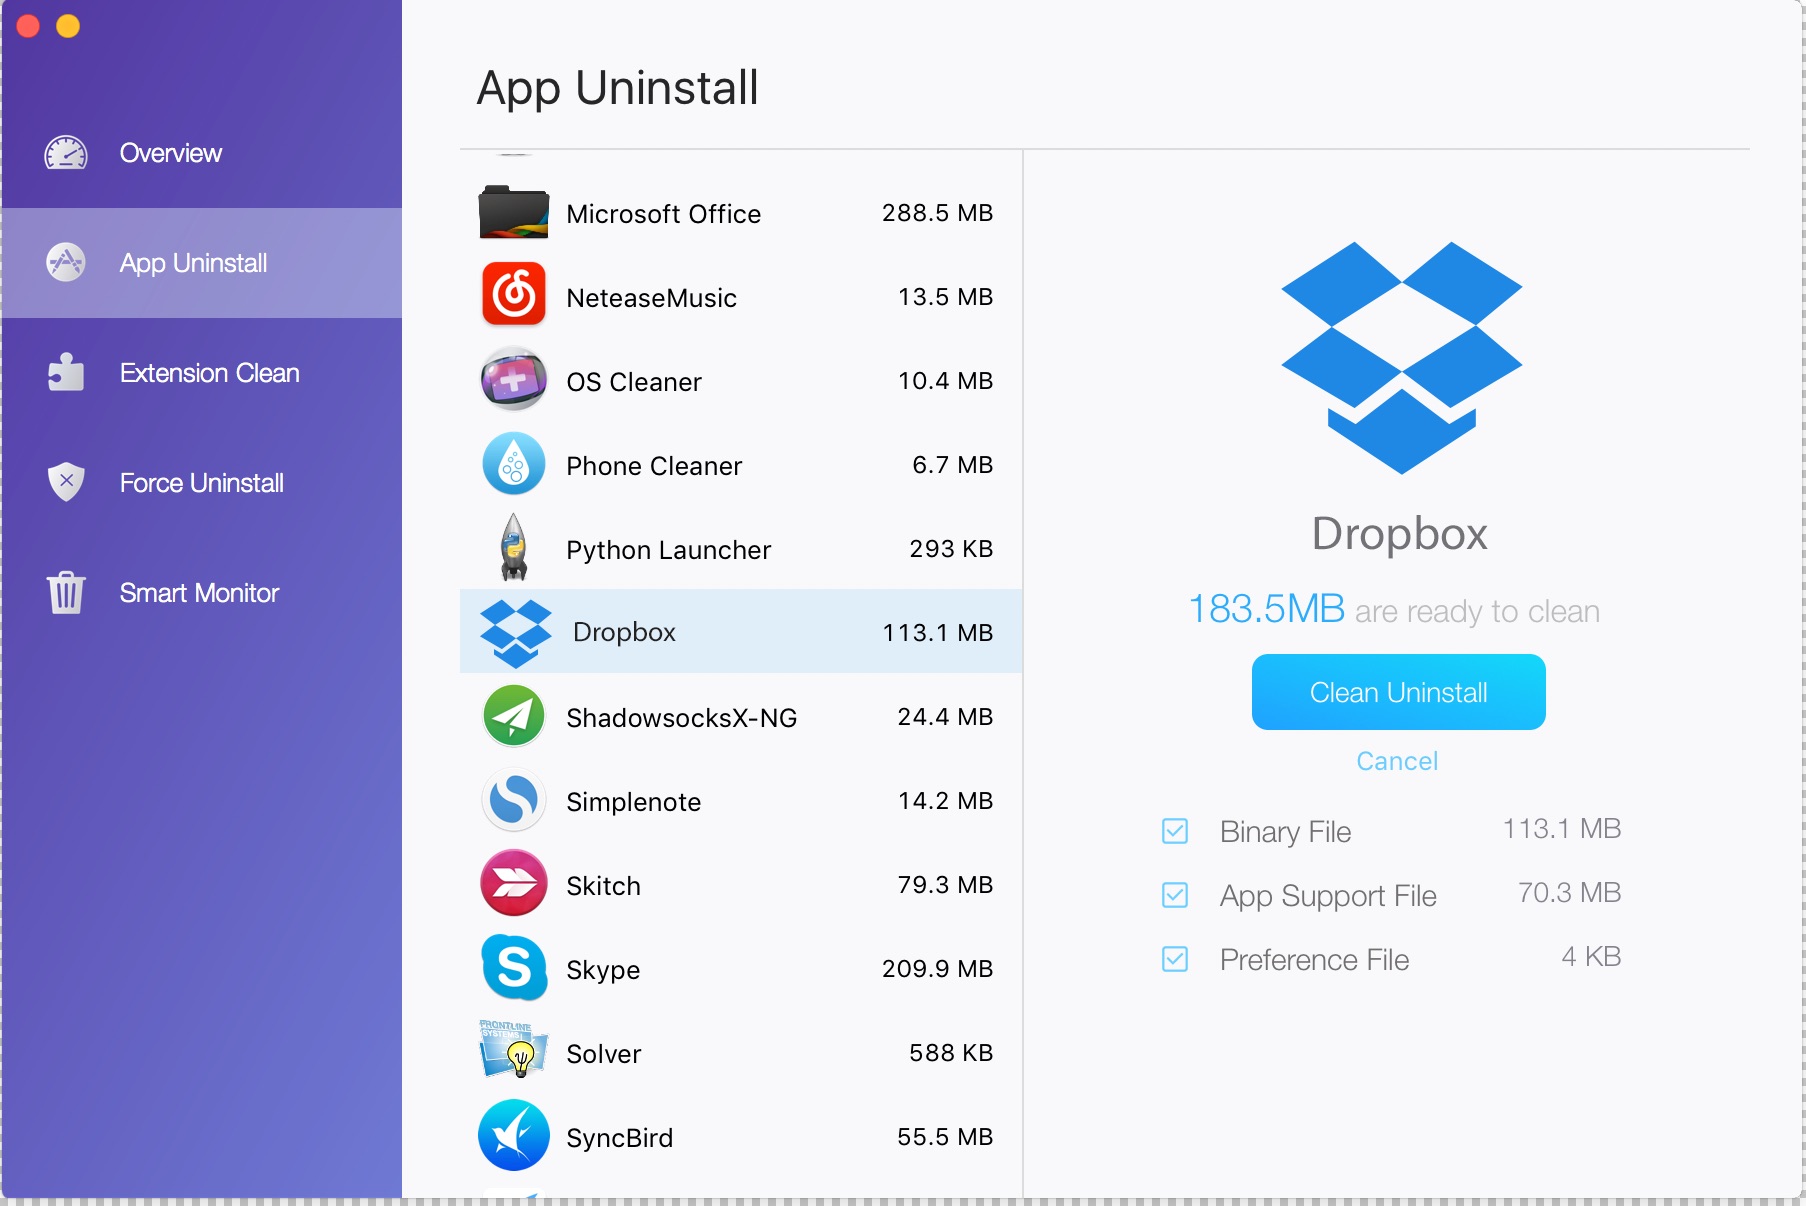 download files from dropbox